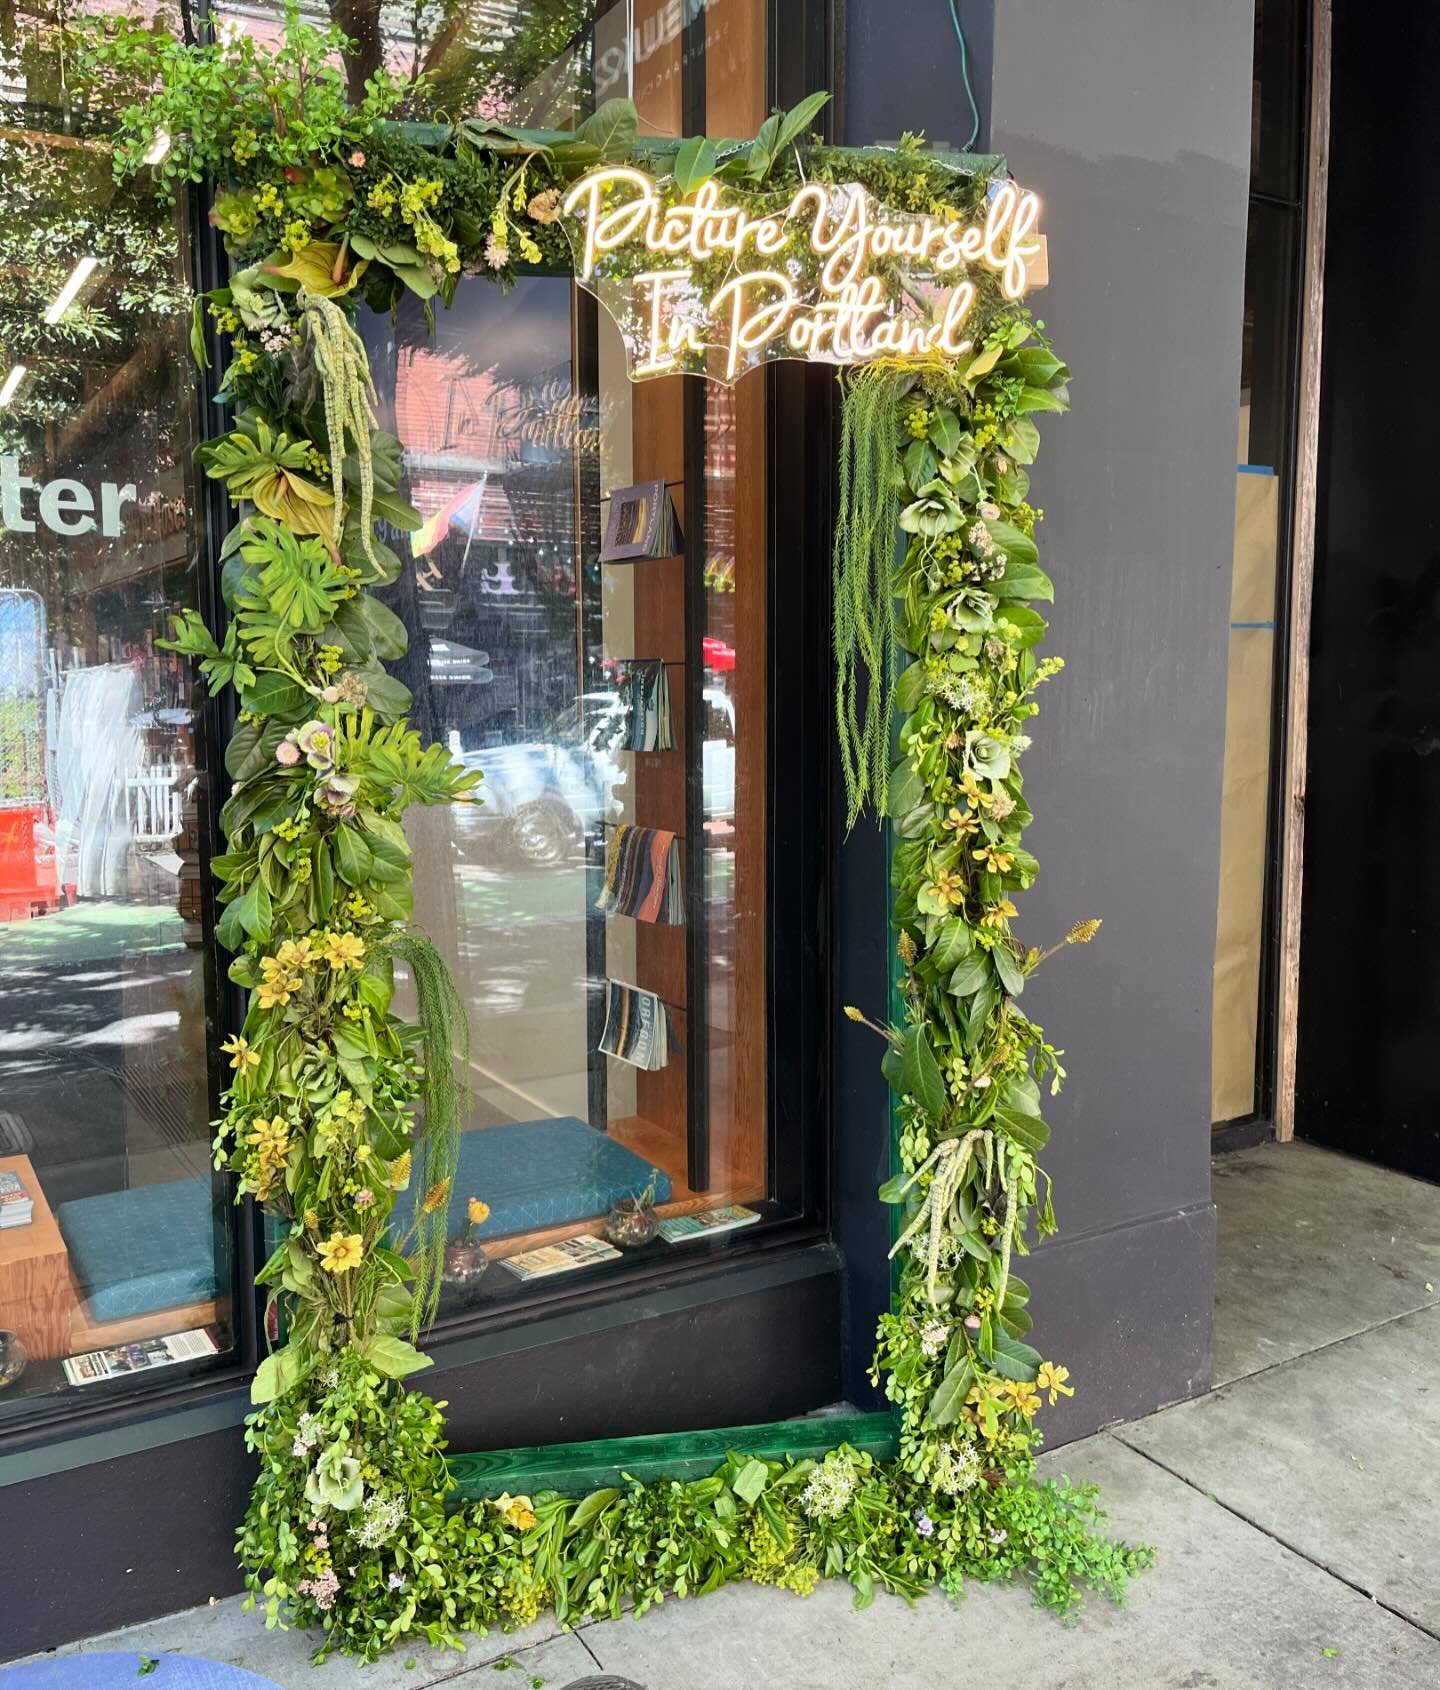 The Bloom Tour officially starts tomorrow! You can go see our two instillations and take yourself on a little walking tour to see all 29 pieces created by florists and plant people all around downtown. 
@downtownpdx @travelportland @ravensmanor 
.
. 